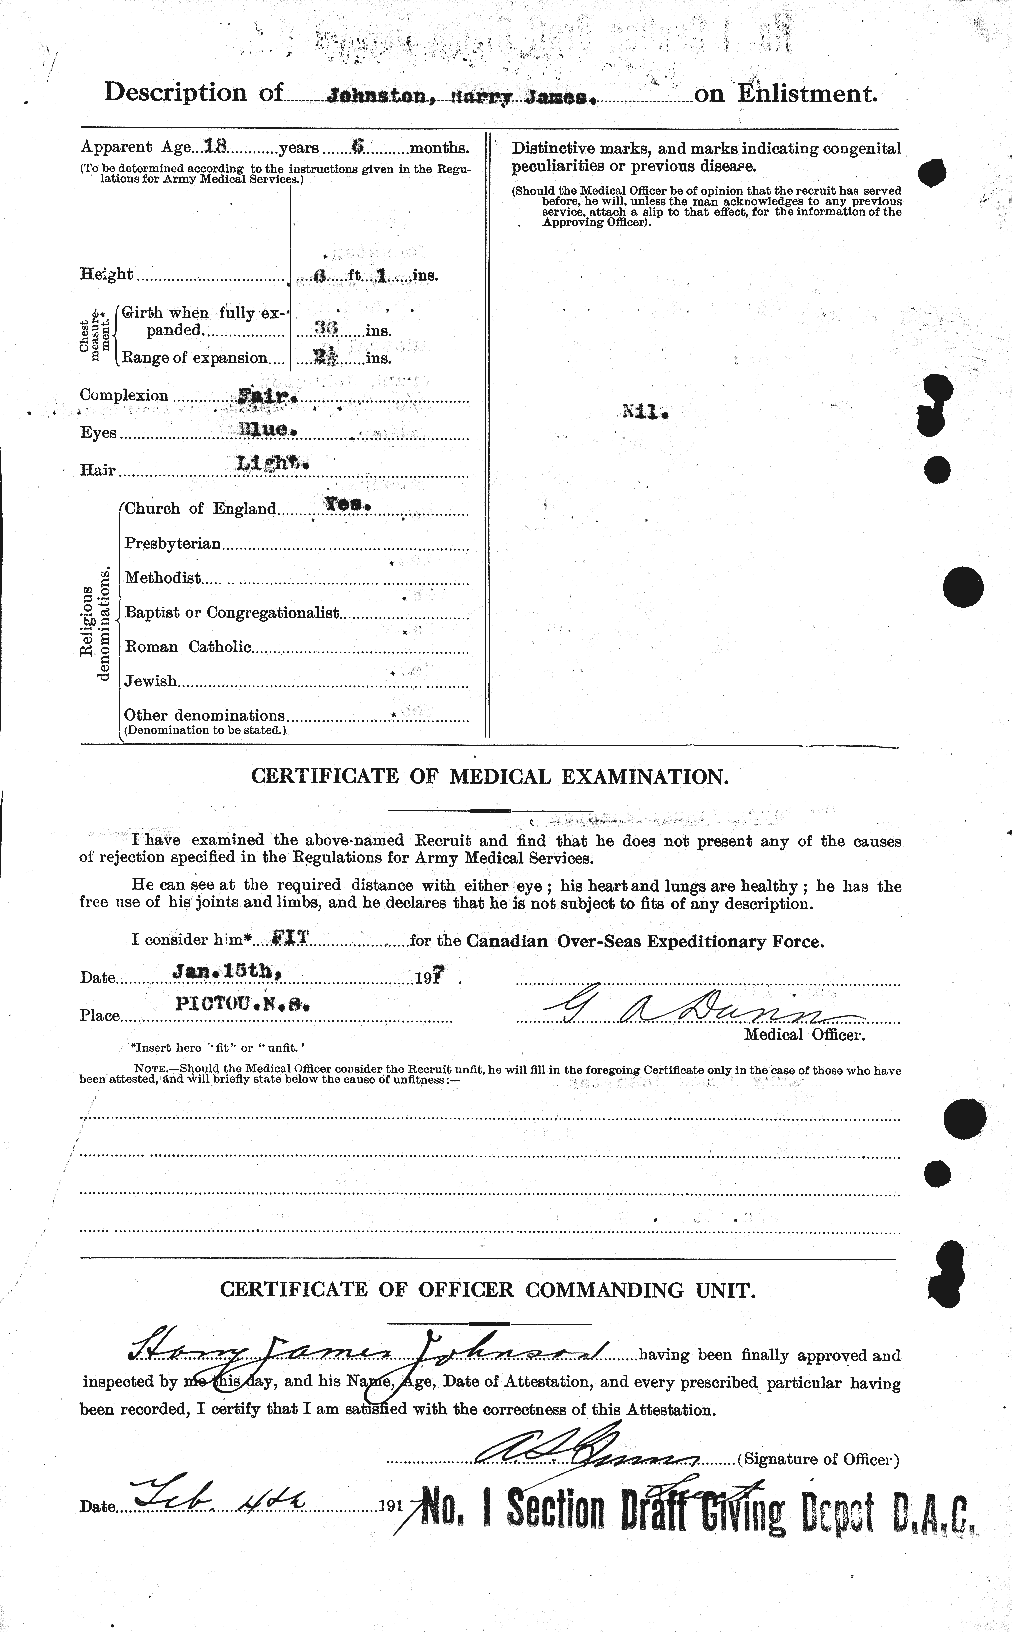 Personnel Records of the First World War - CEF 419519b